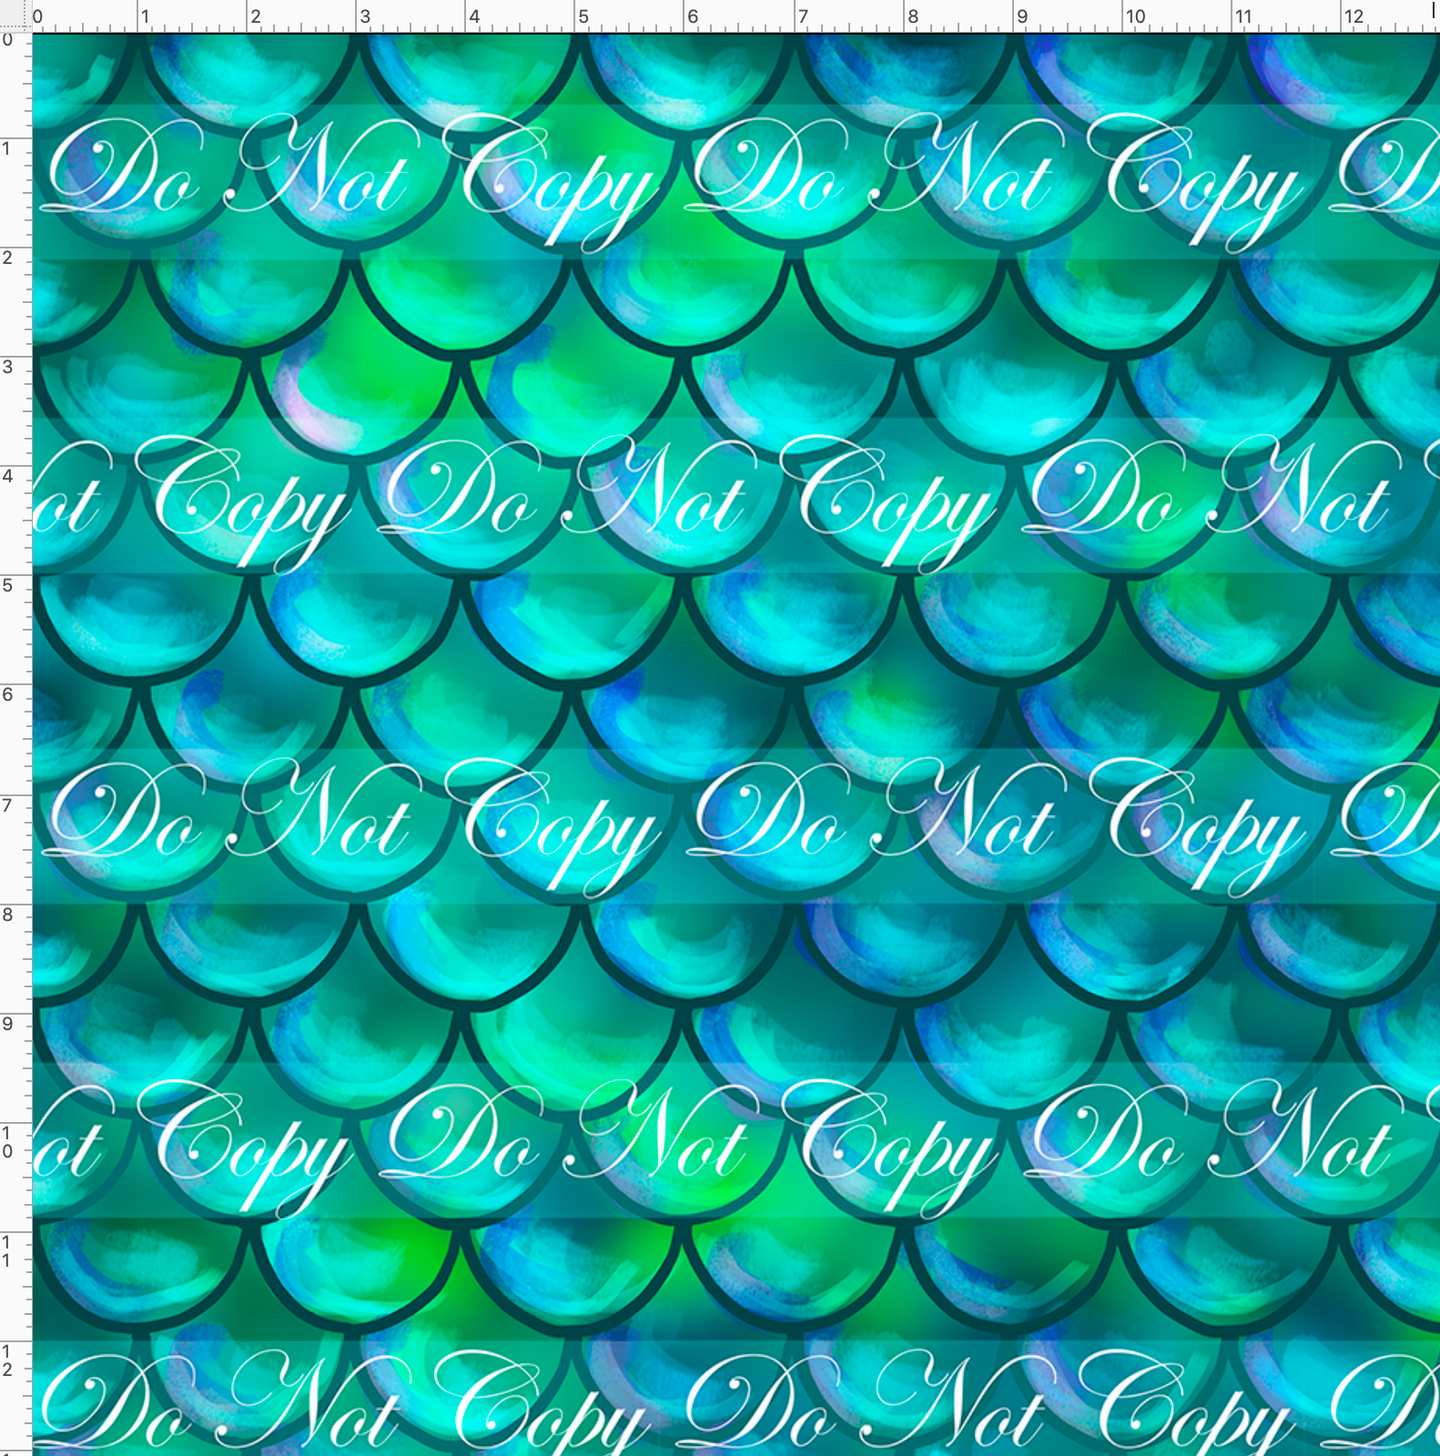 CATALOG - PREORDER R51 - Under the Sea - Scales - Teal - REGULAR SCALE